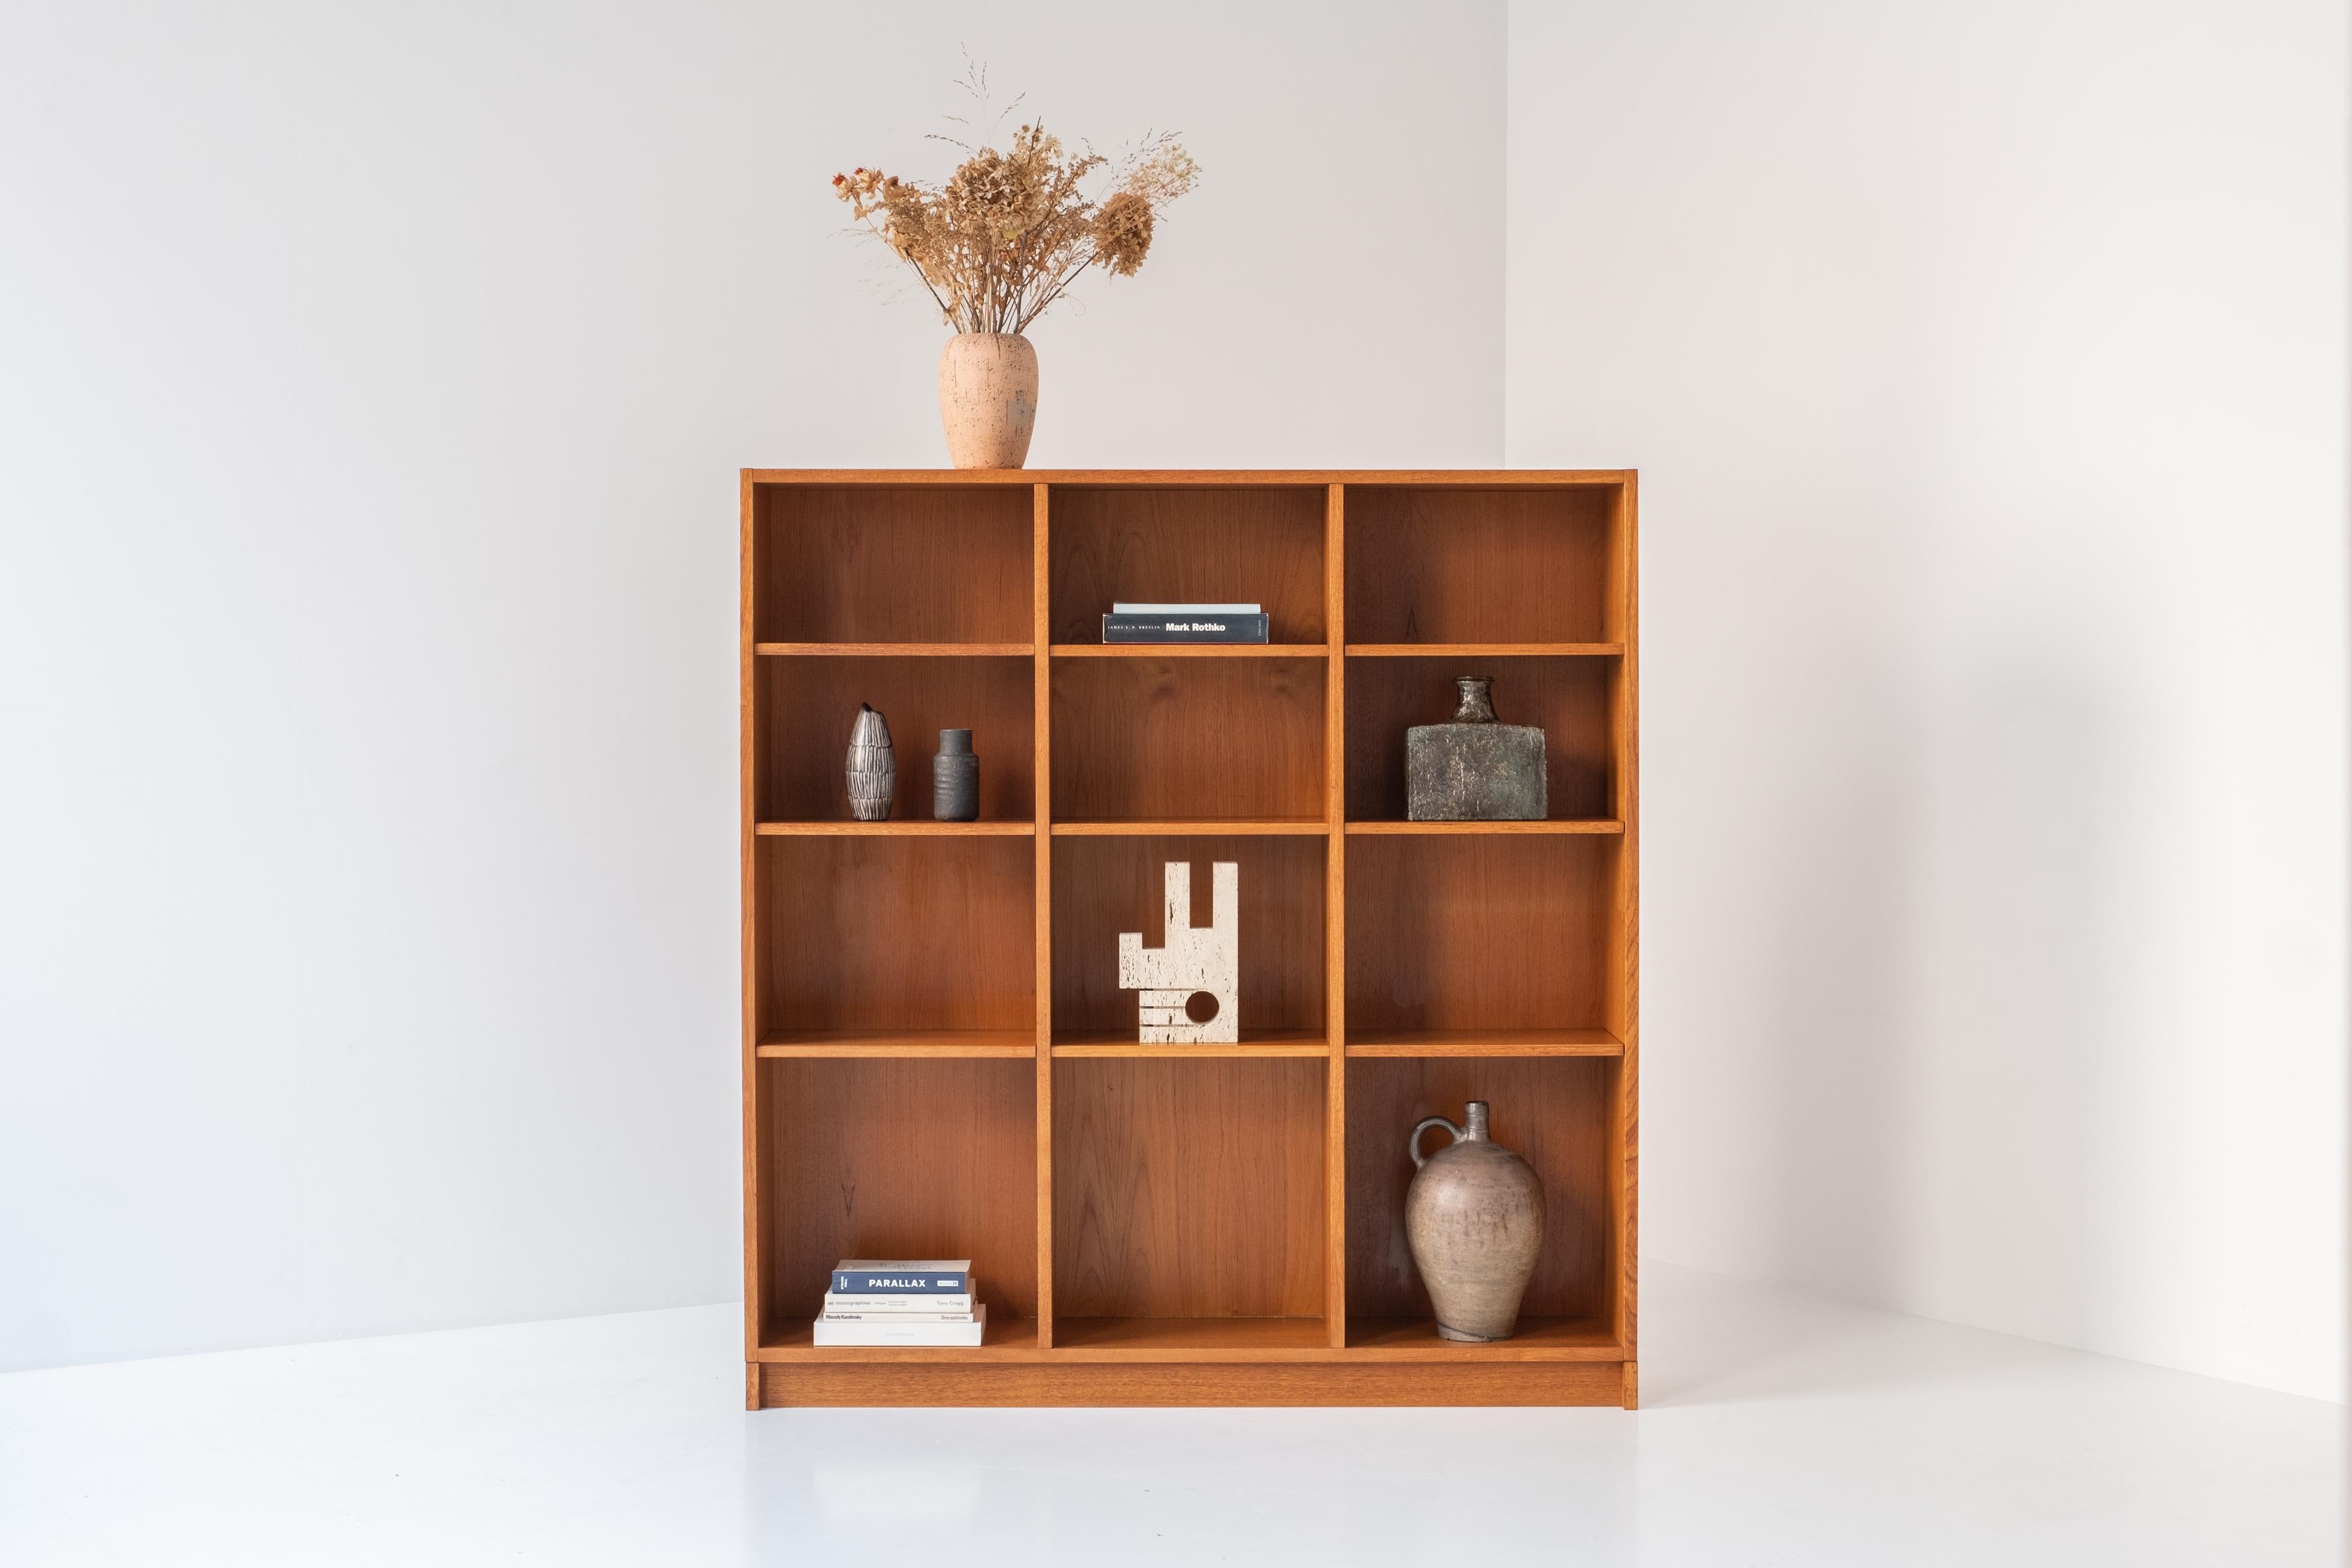 Open storage cabinet by Rud Thygesen for HG Furniture, Denmark 1960s. This bookcase is made out of oak and features adjustable shelves. Good original condition with some visible wear from age and use. Labeled on the back